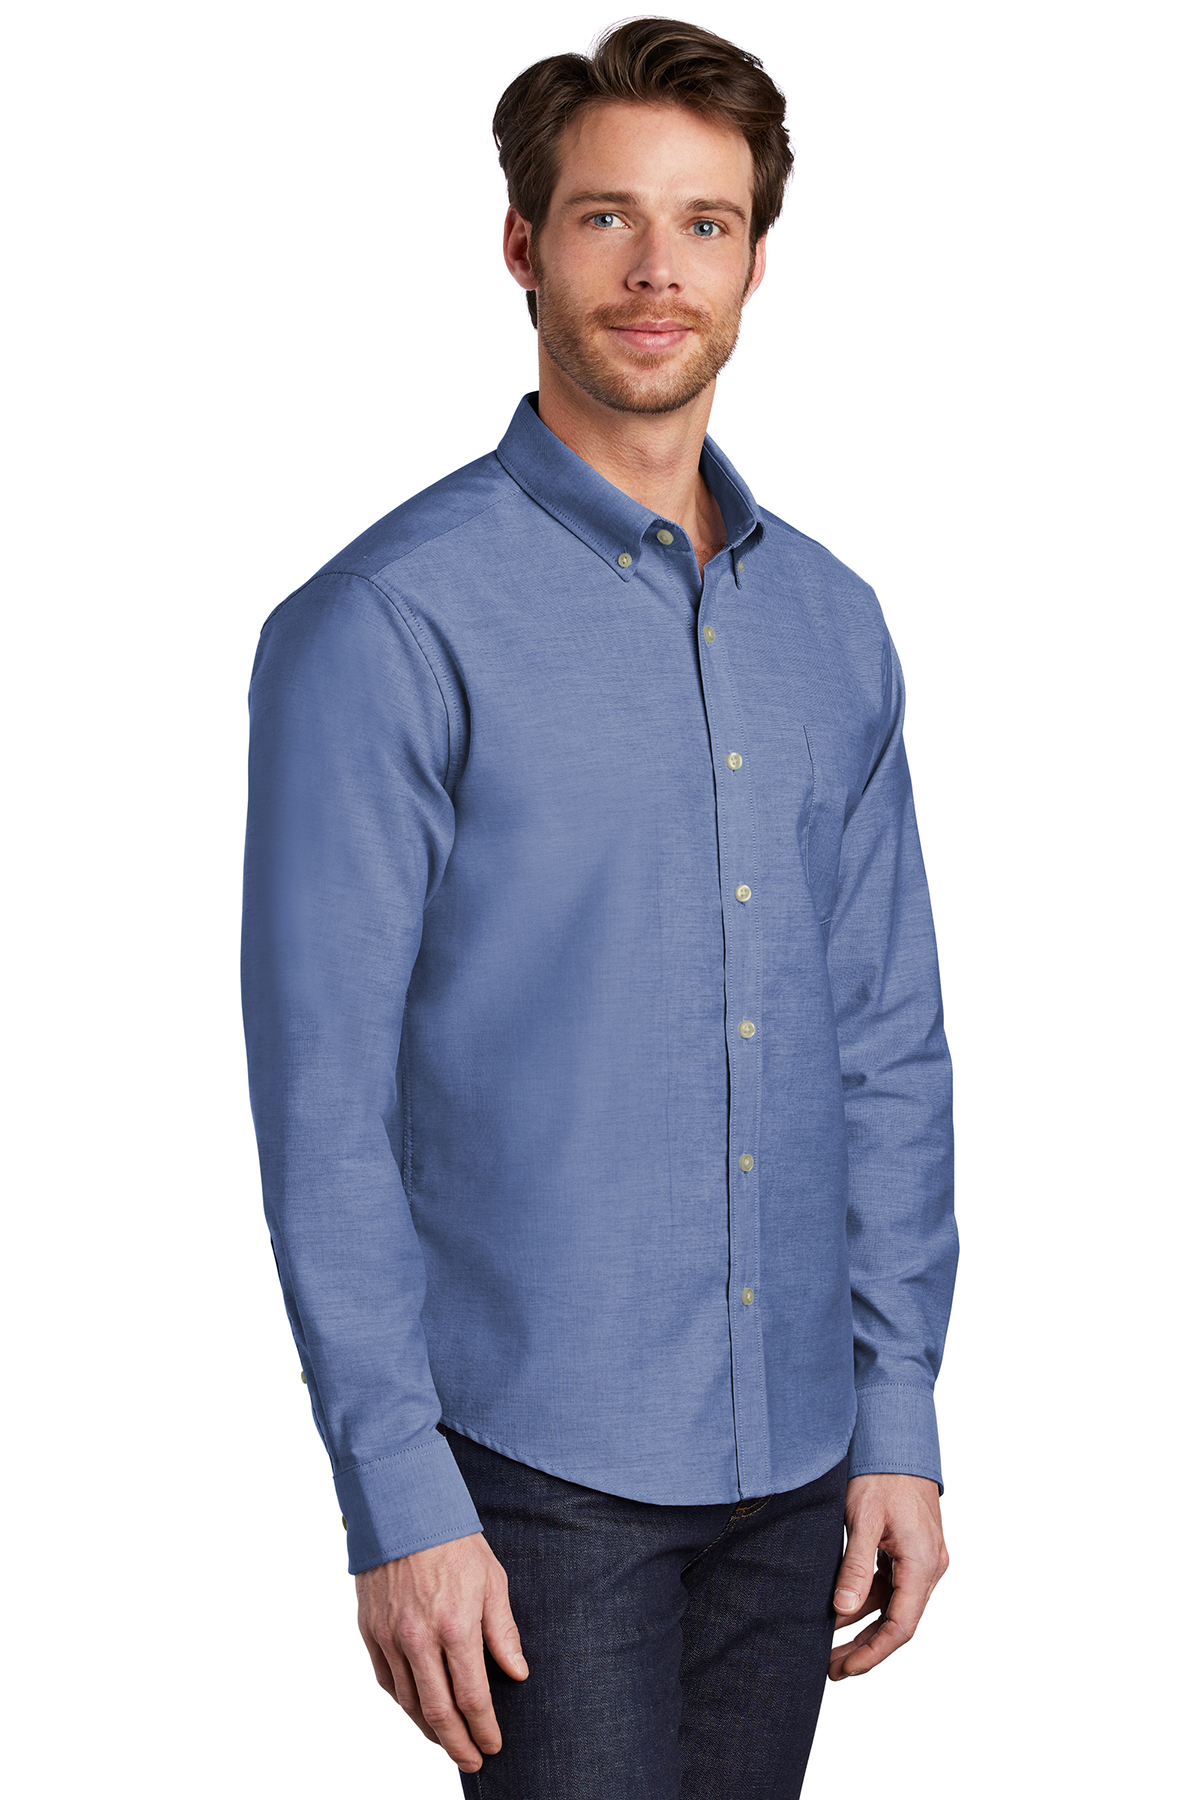 Port Authority Untucked Fit SuperPro Oxford Shirt | Product | Company ...